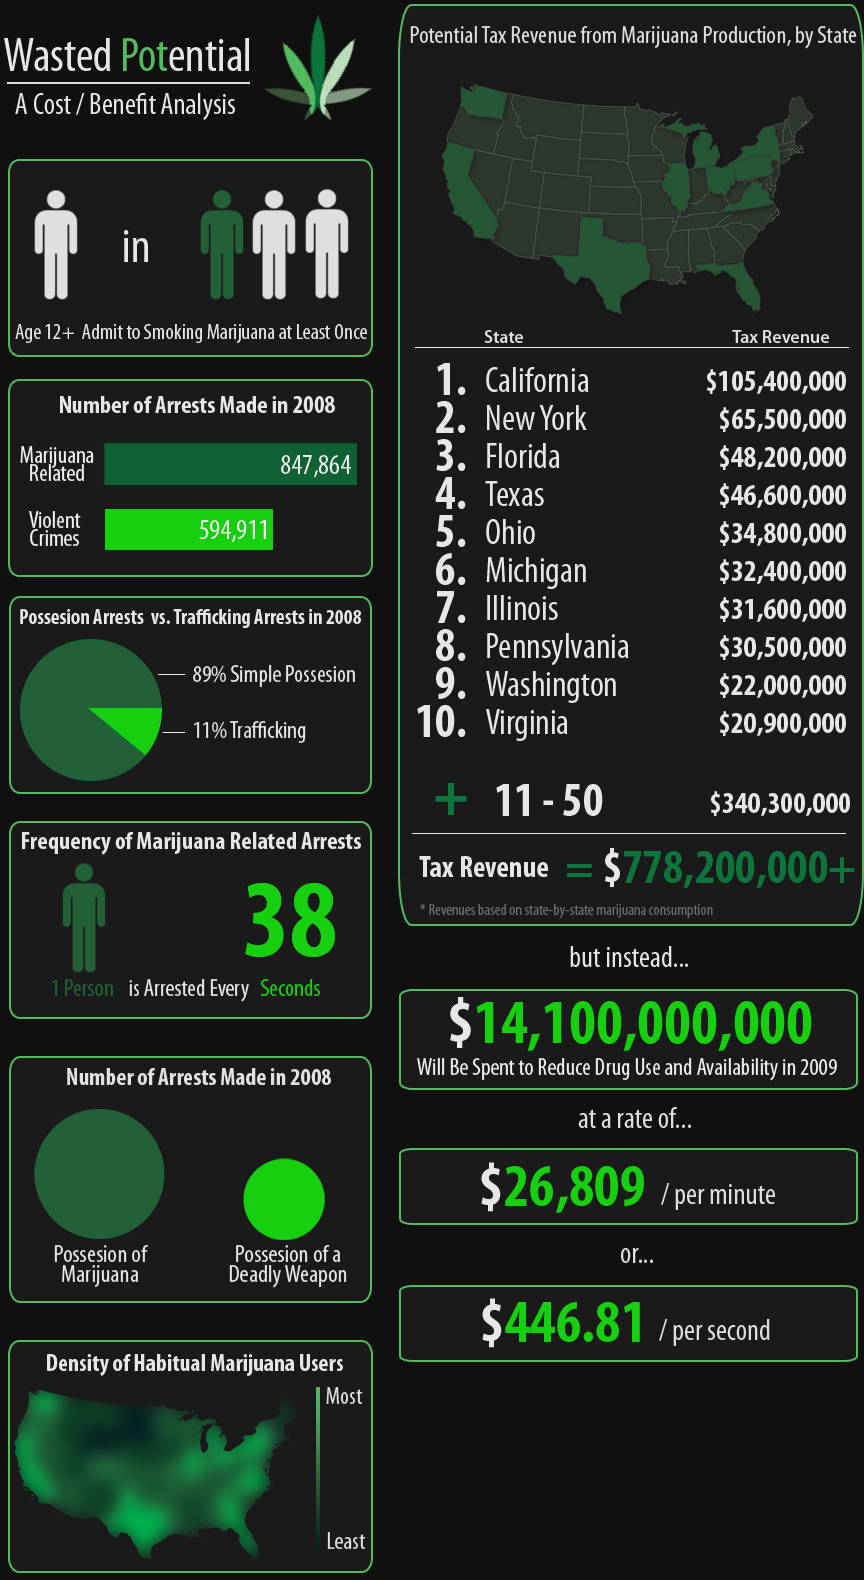 handy infographic outlining the cost and revenue lost of marijuana prohibition